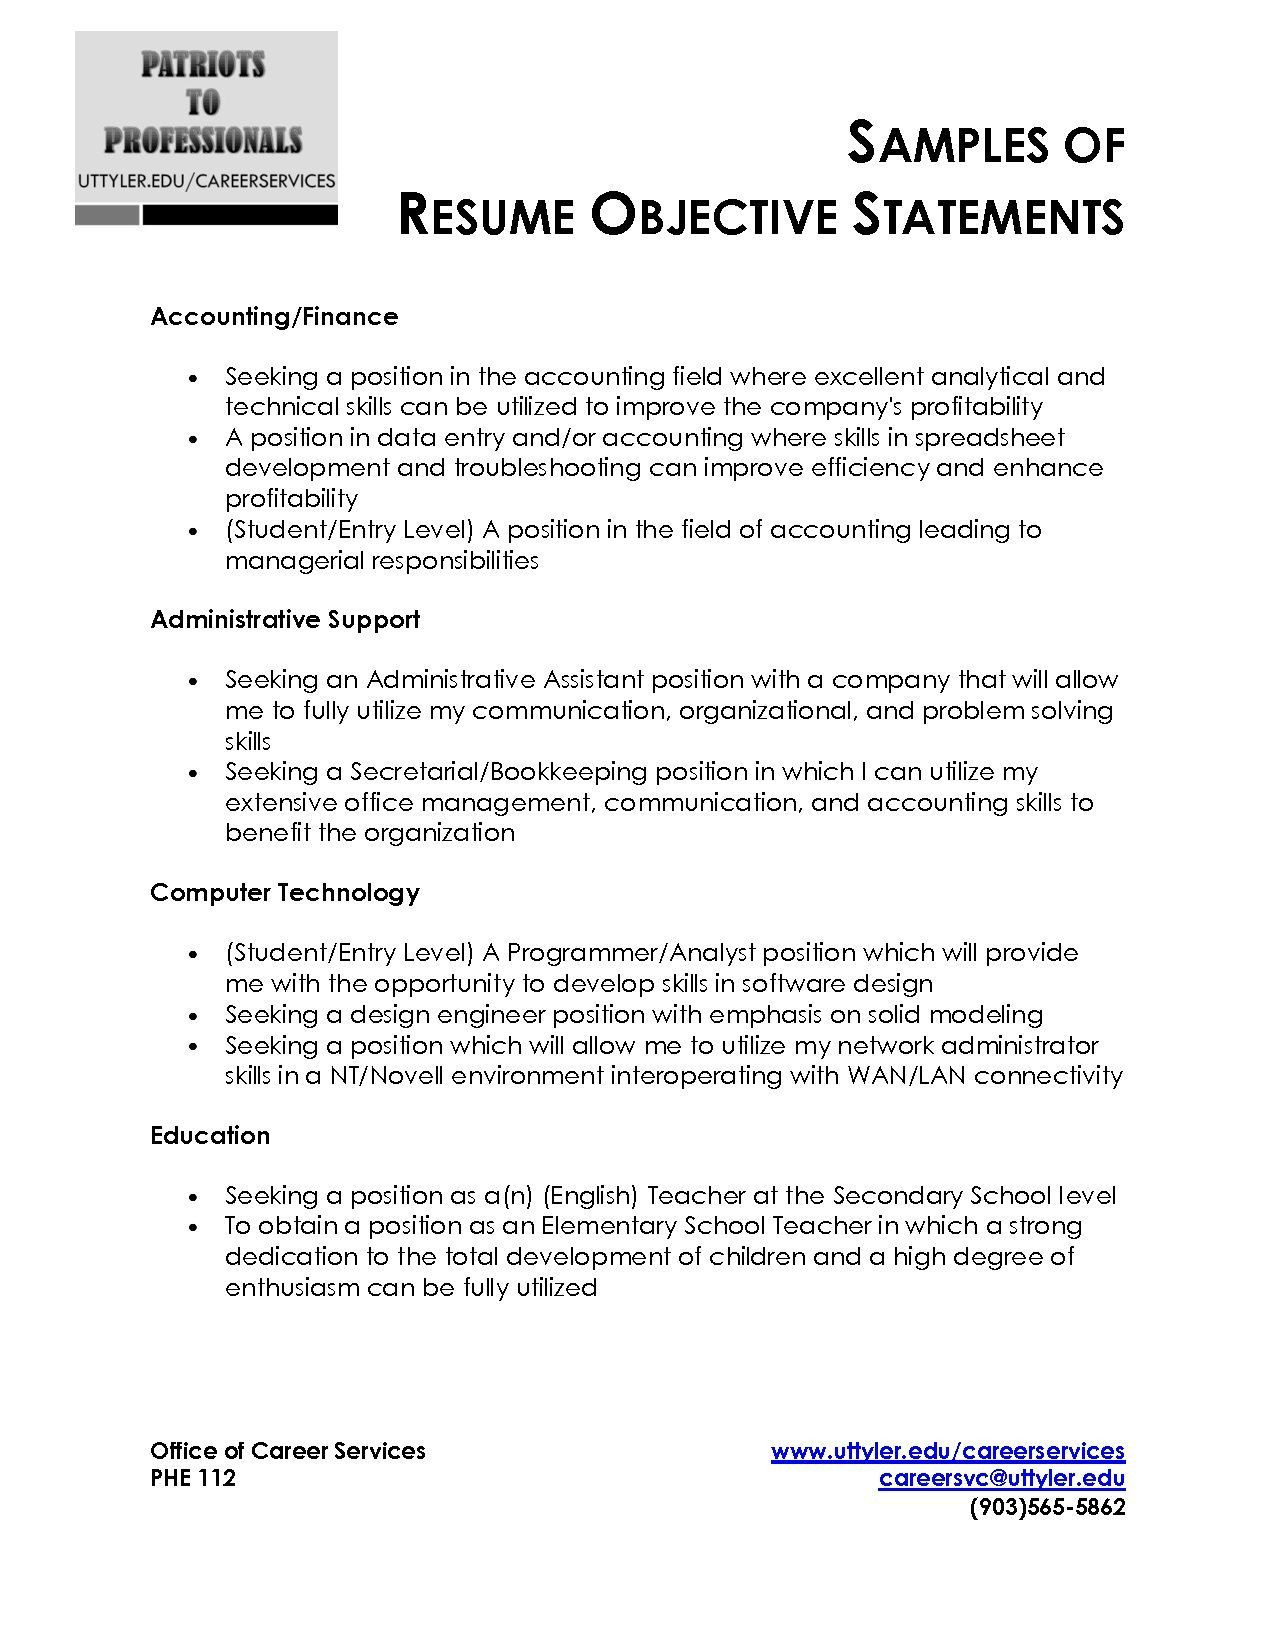 Sample Resume Objective for Any Position Pin On Random